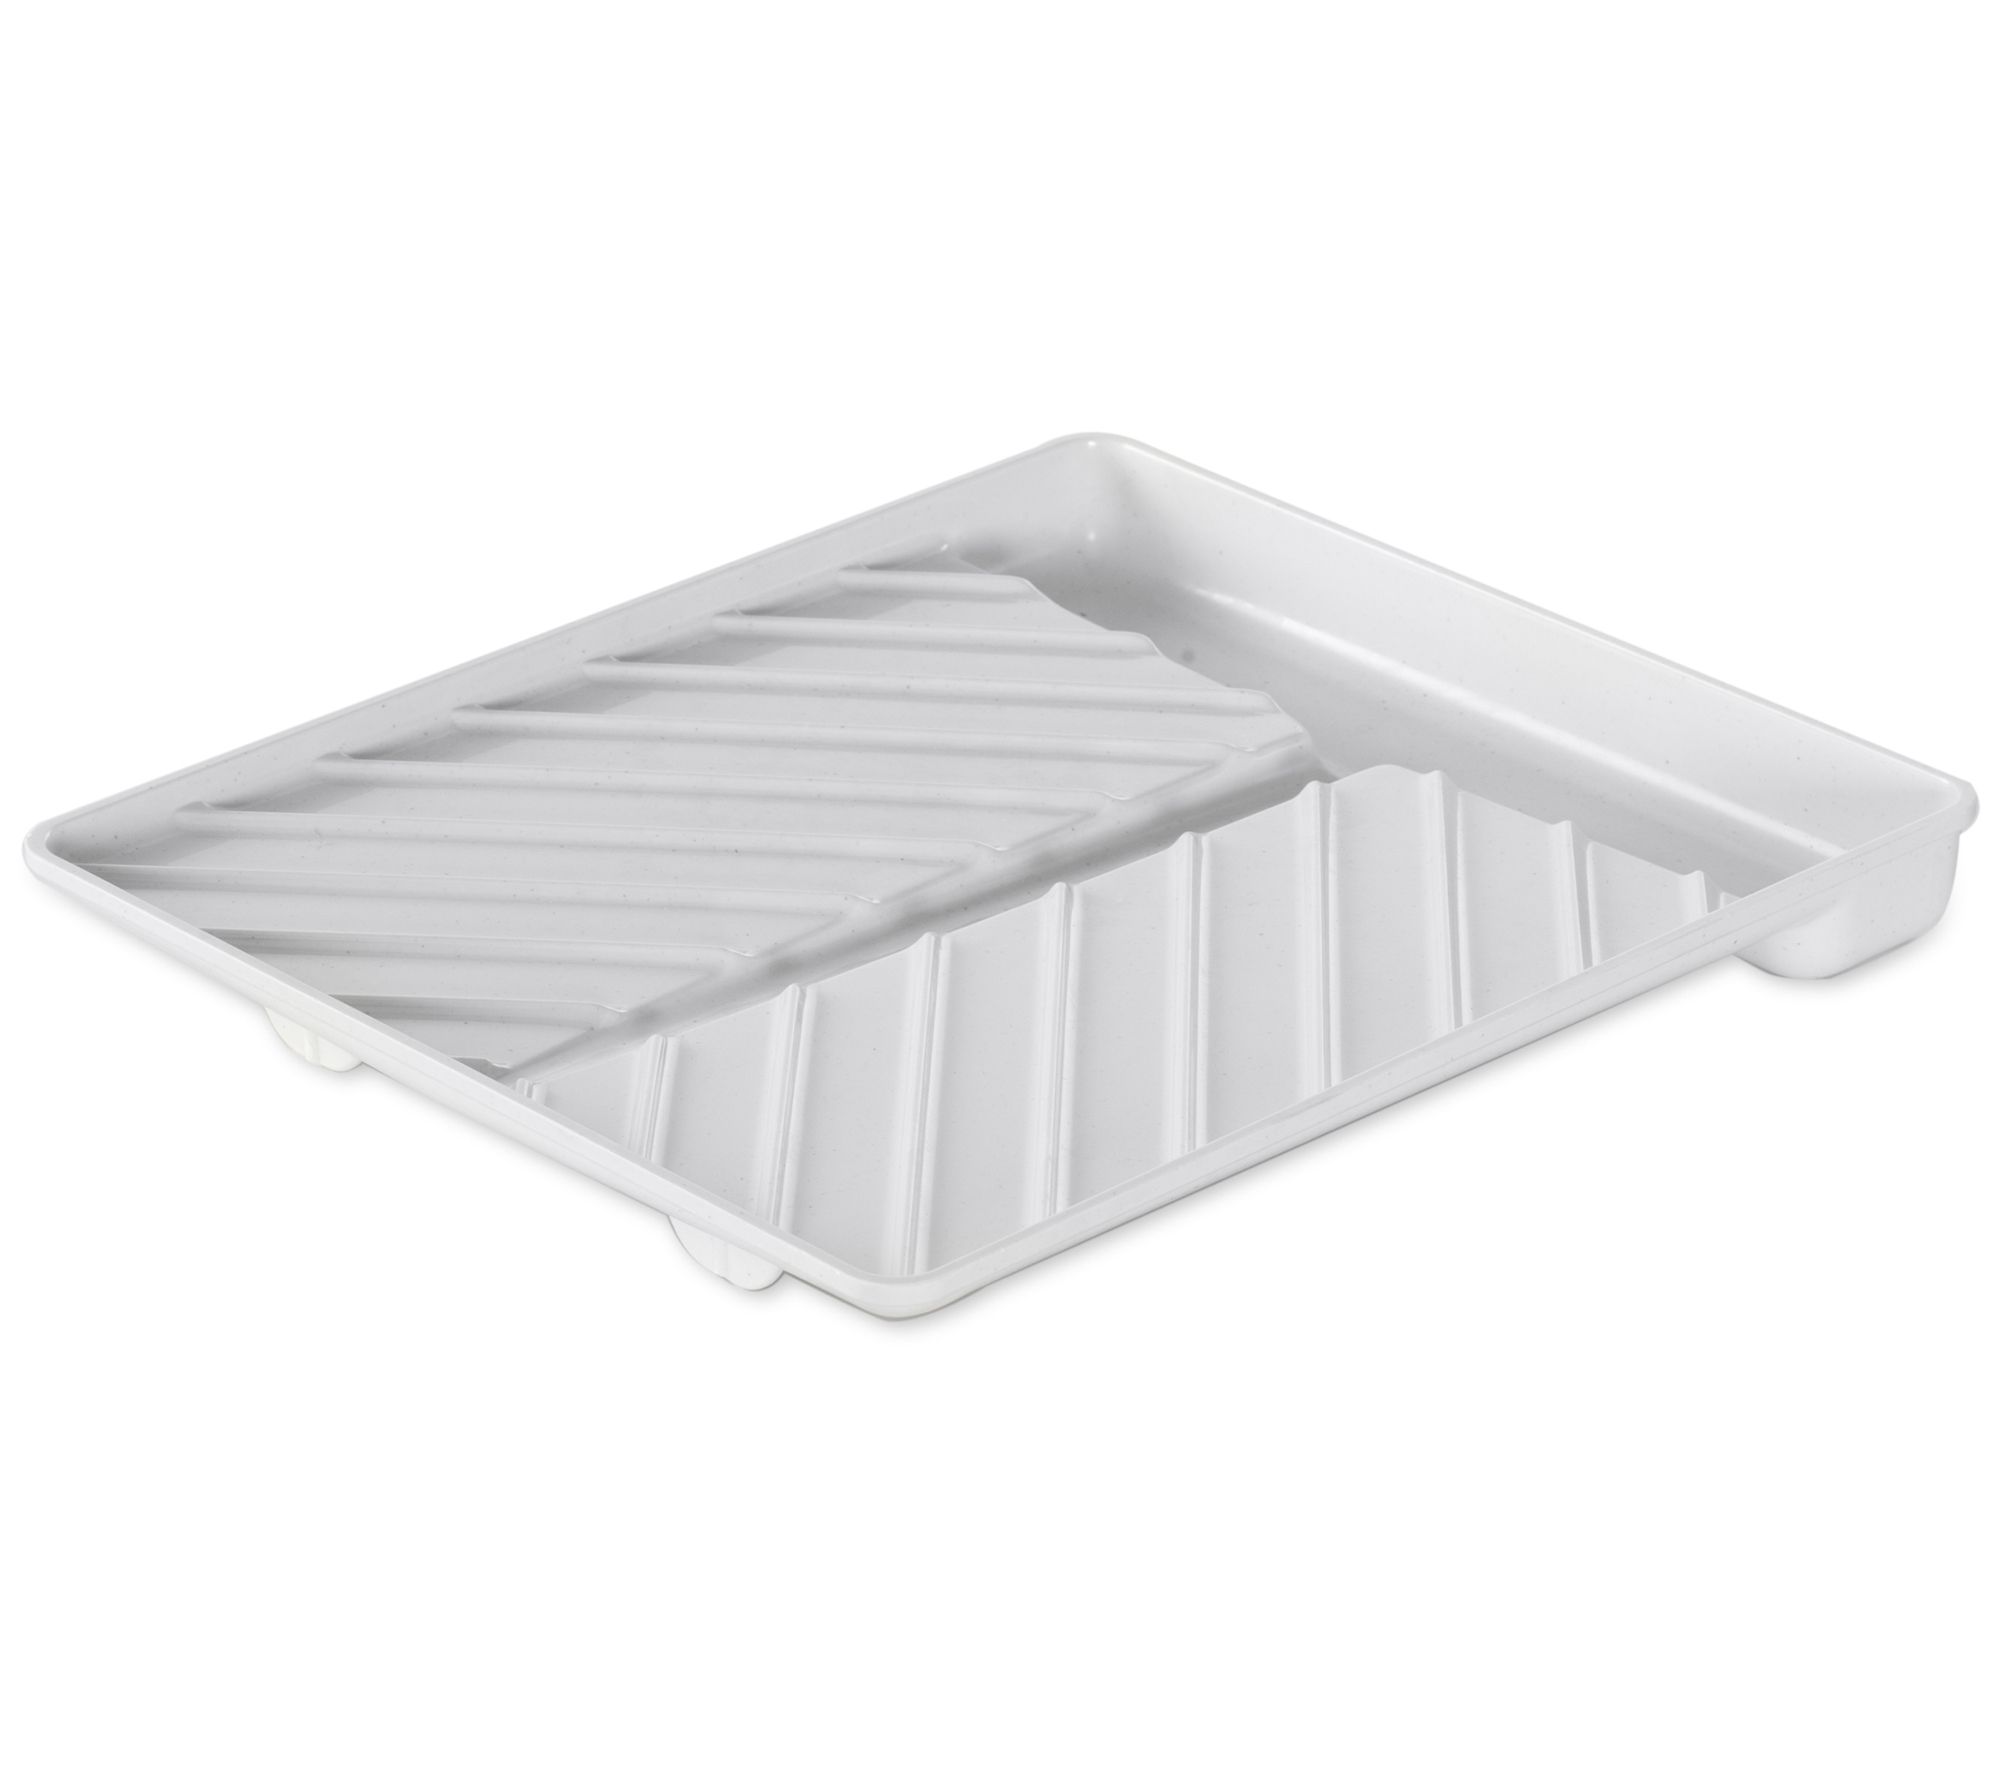 Nordic Ware Microwave Compact Bacon Plastic Rack,10-Inch by 8-Inch